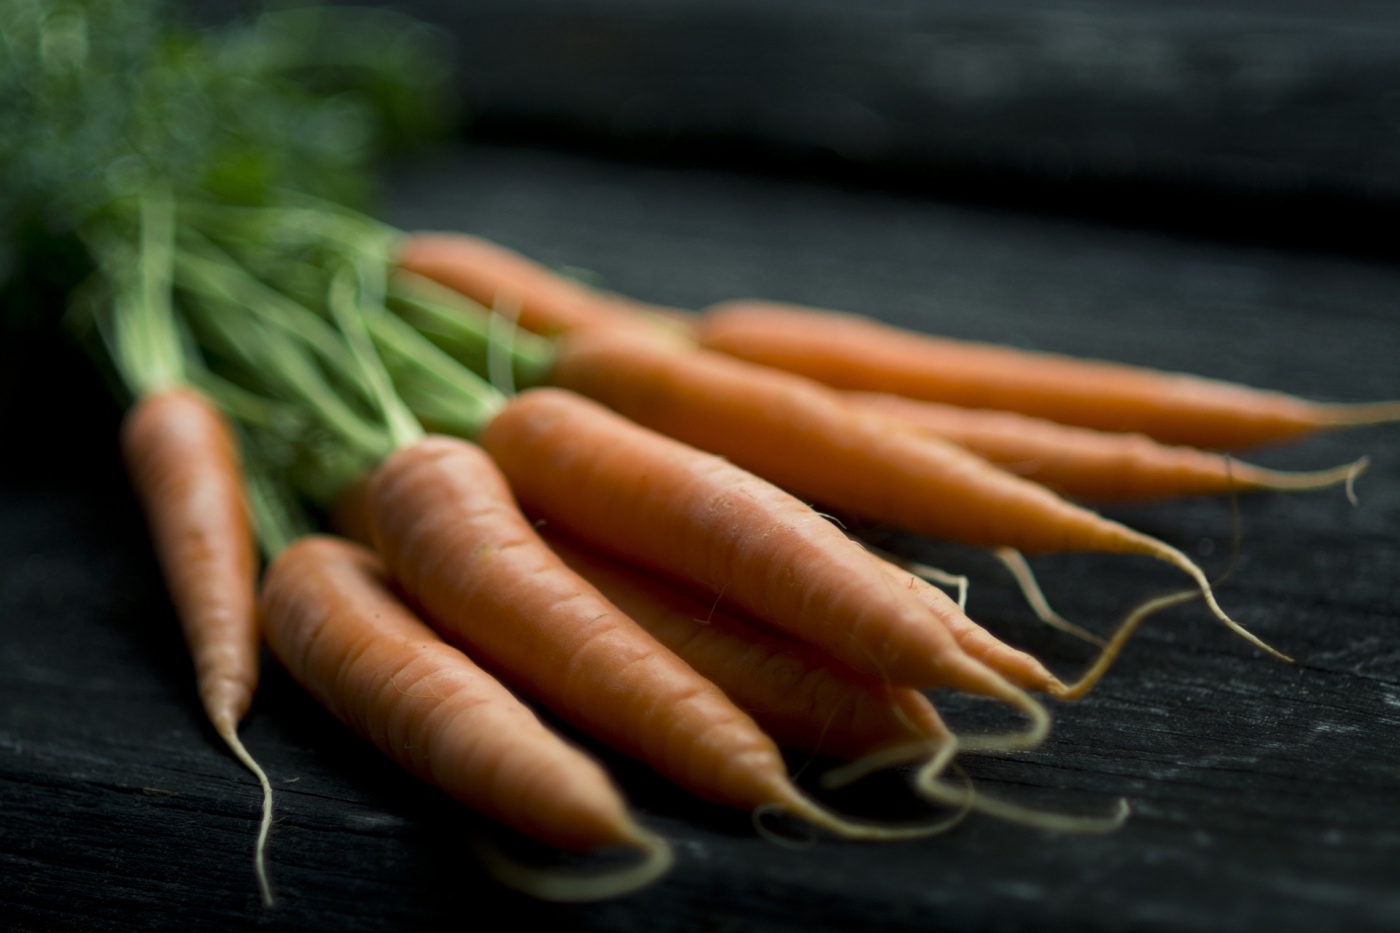 carrots to make roasted carrots and beets pop shop america